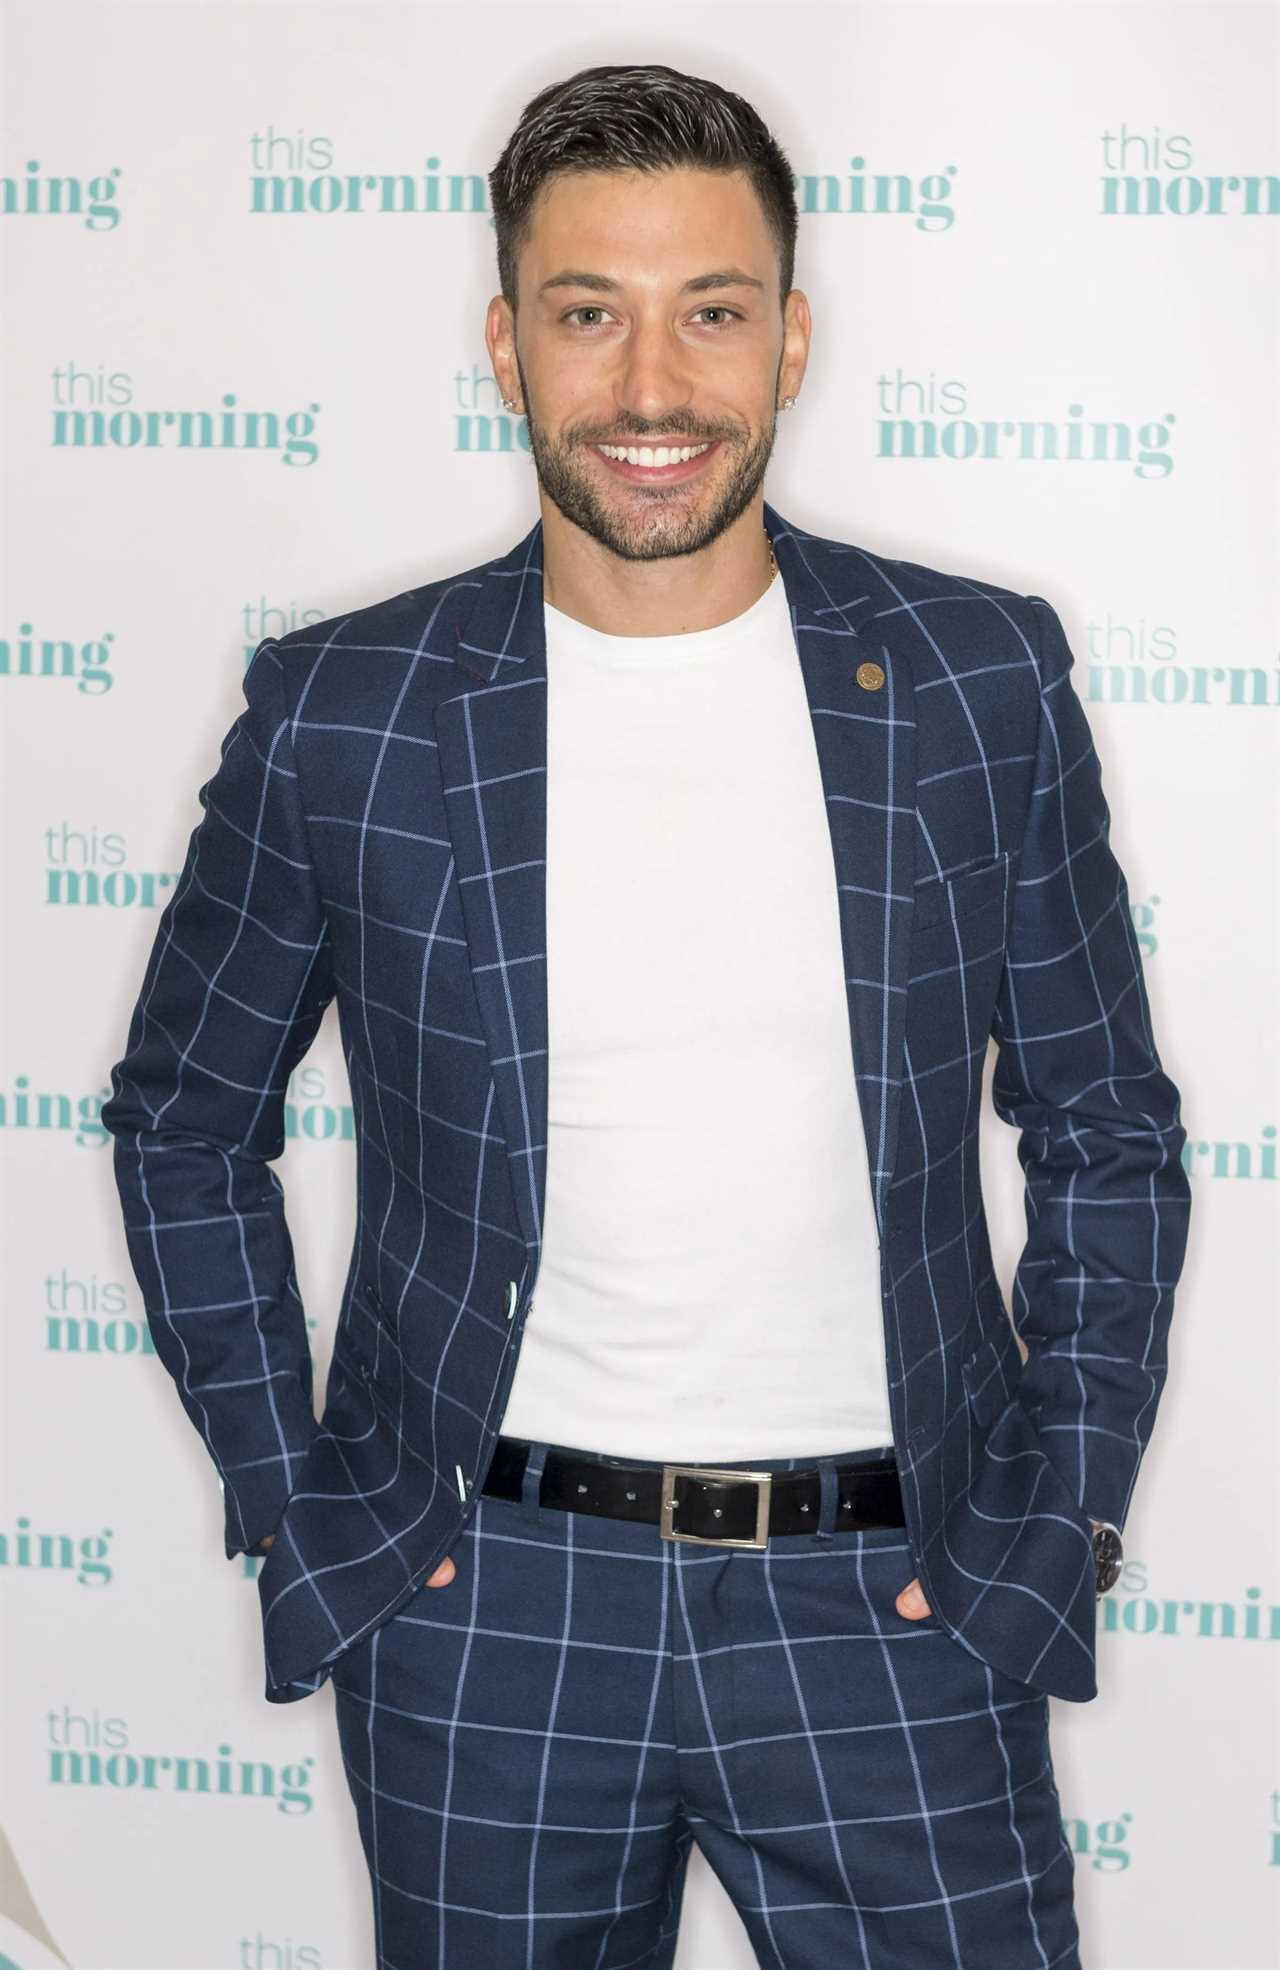 Giovanni Pernice Reunites with Strictly Judges Amid Bullying Allegations